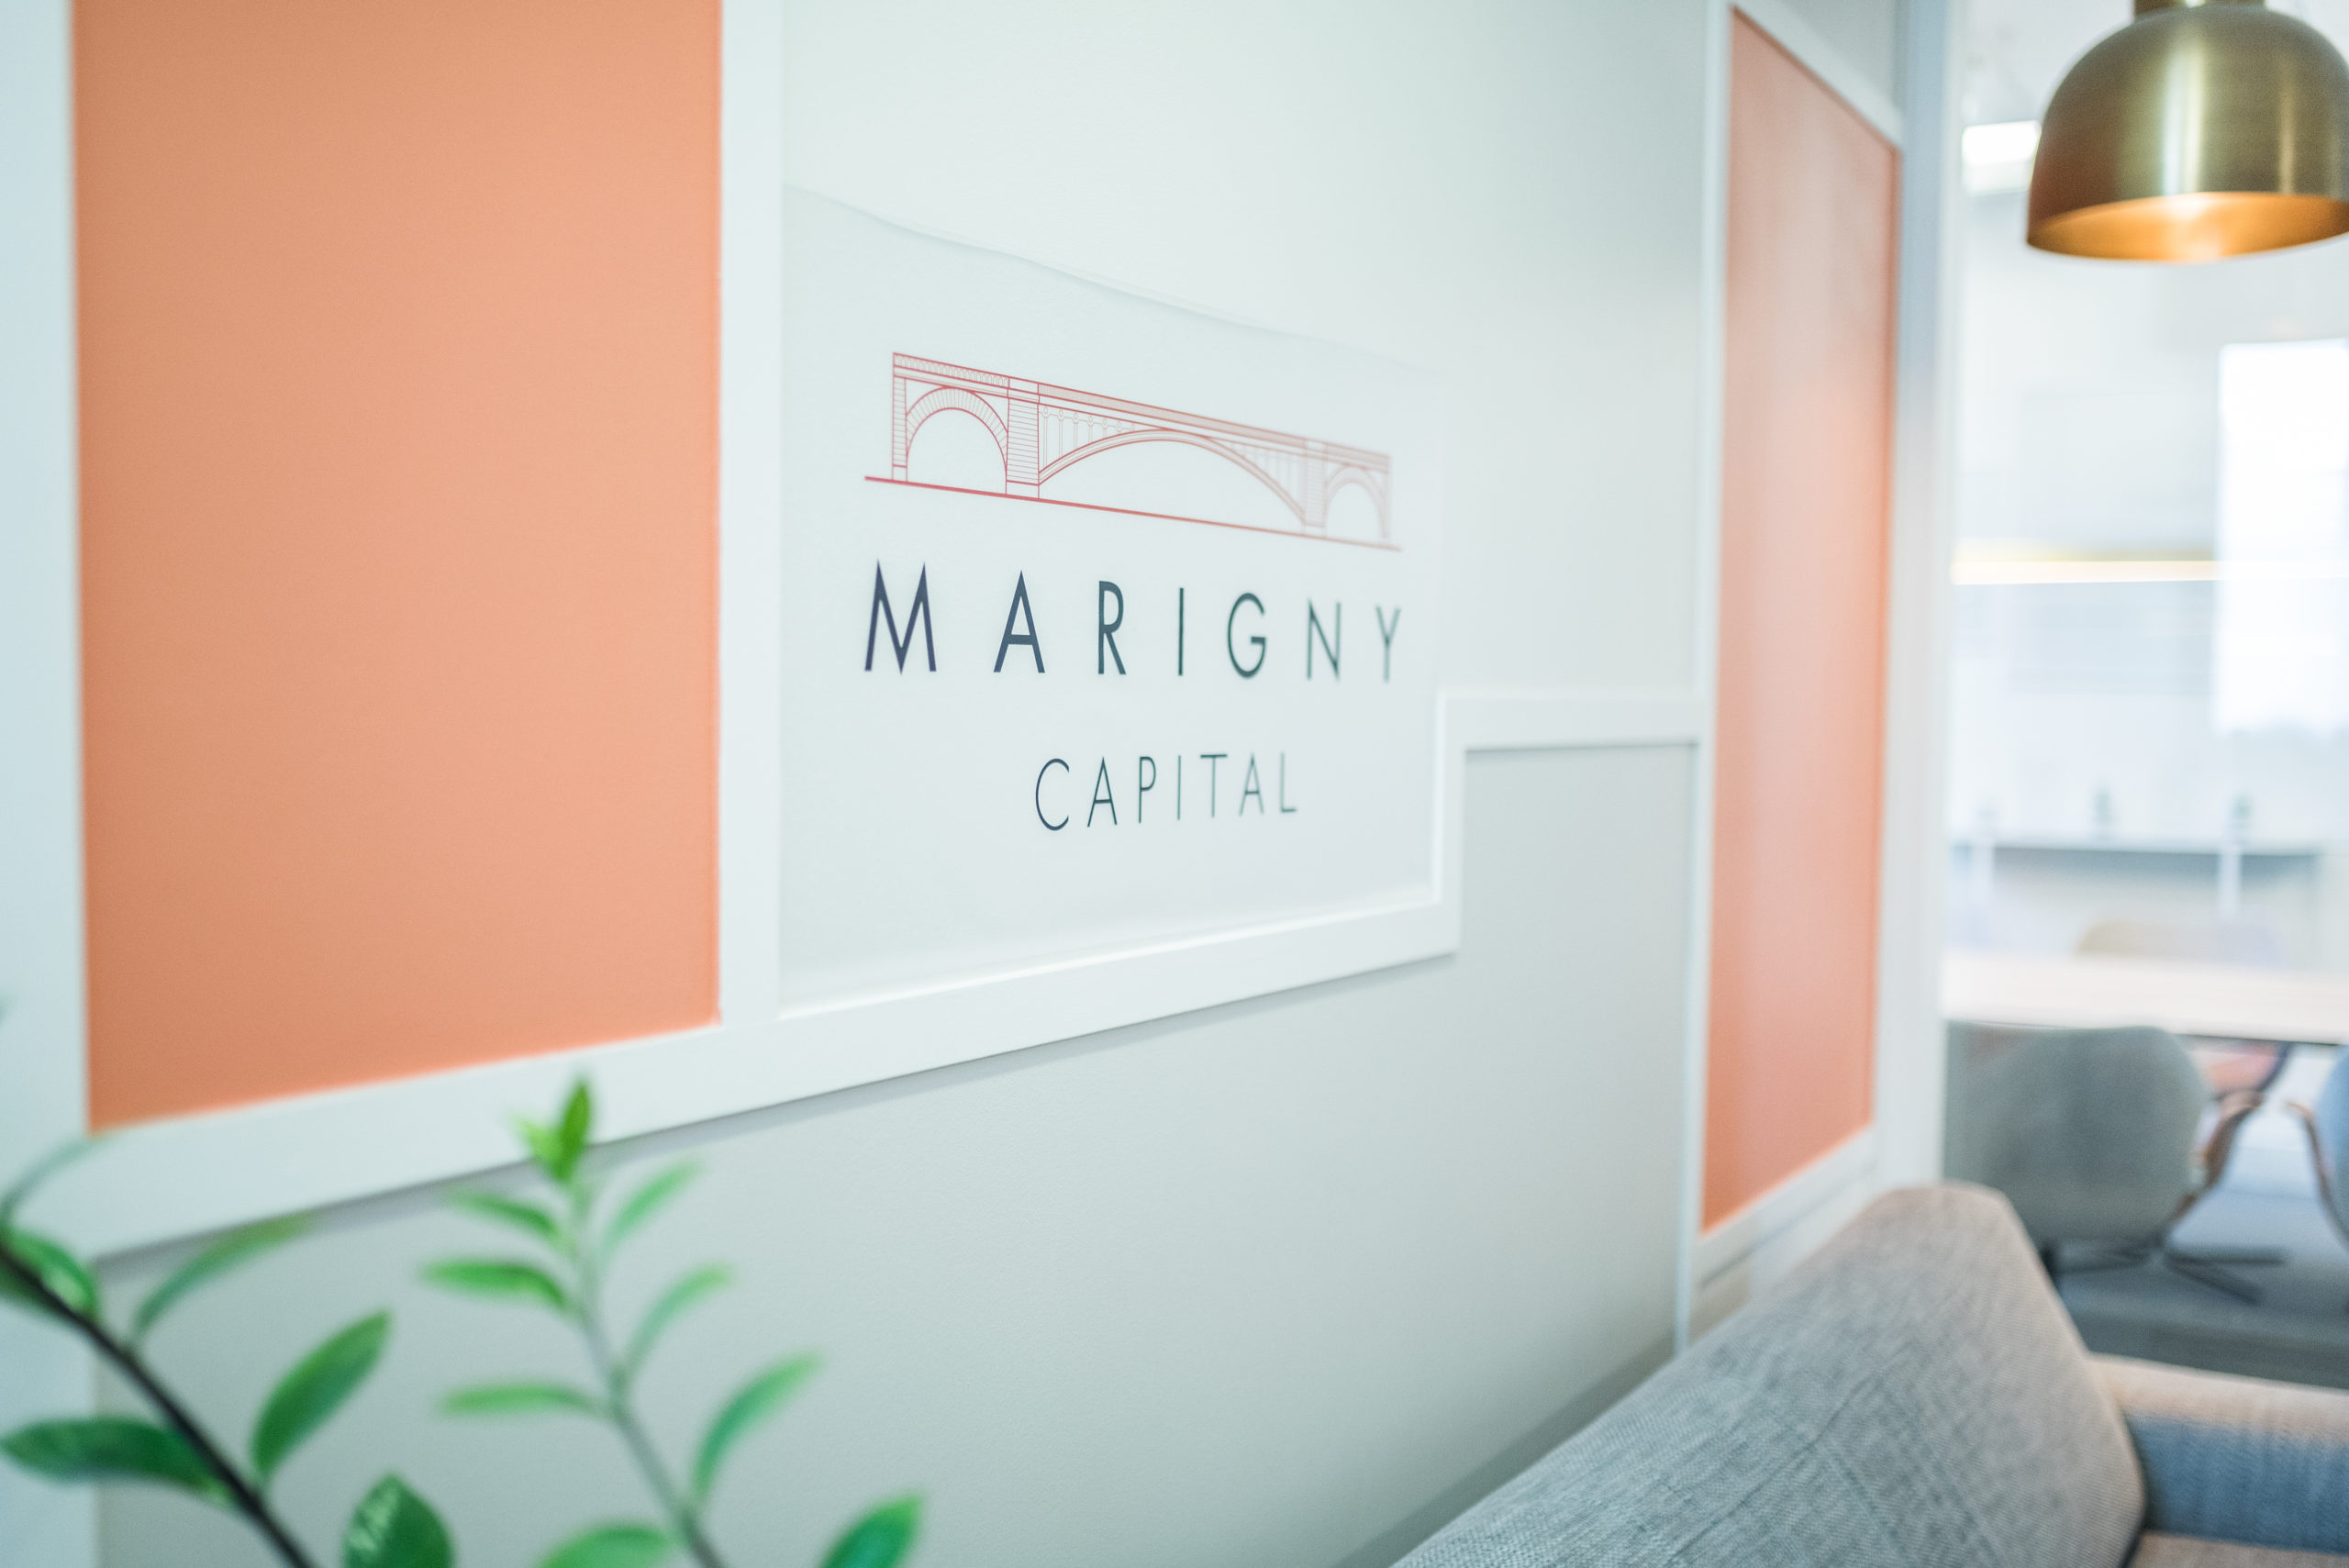 Marigny Capital - Offices of the wealth management consultancy